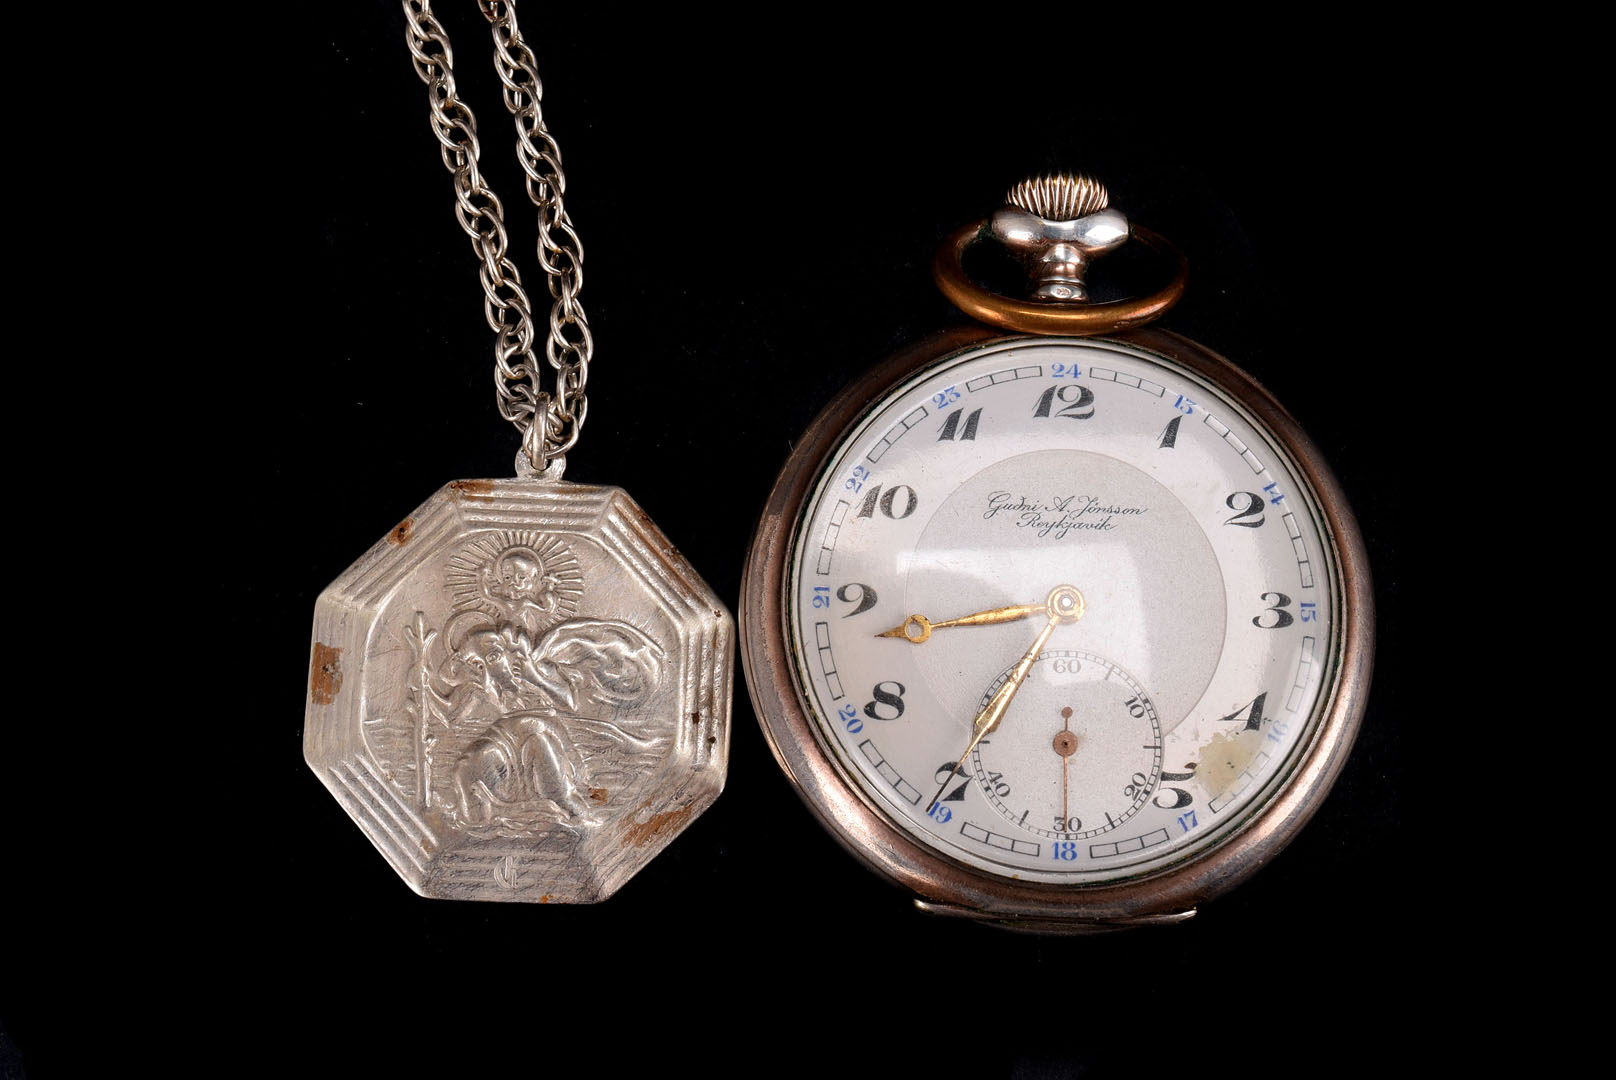 A silver plated pocket watch, by Gidni A Jonsson, Reykjavik, together with a silver St Christopher